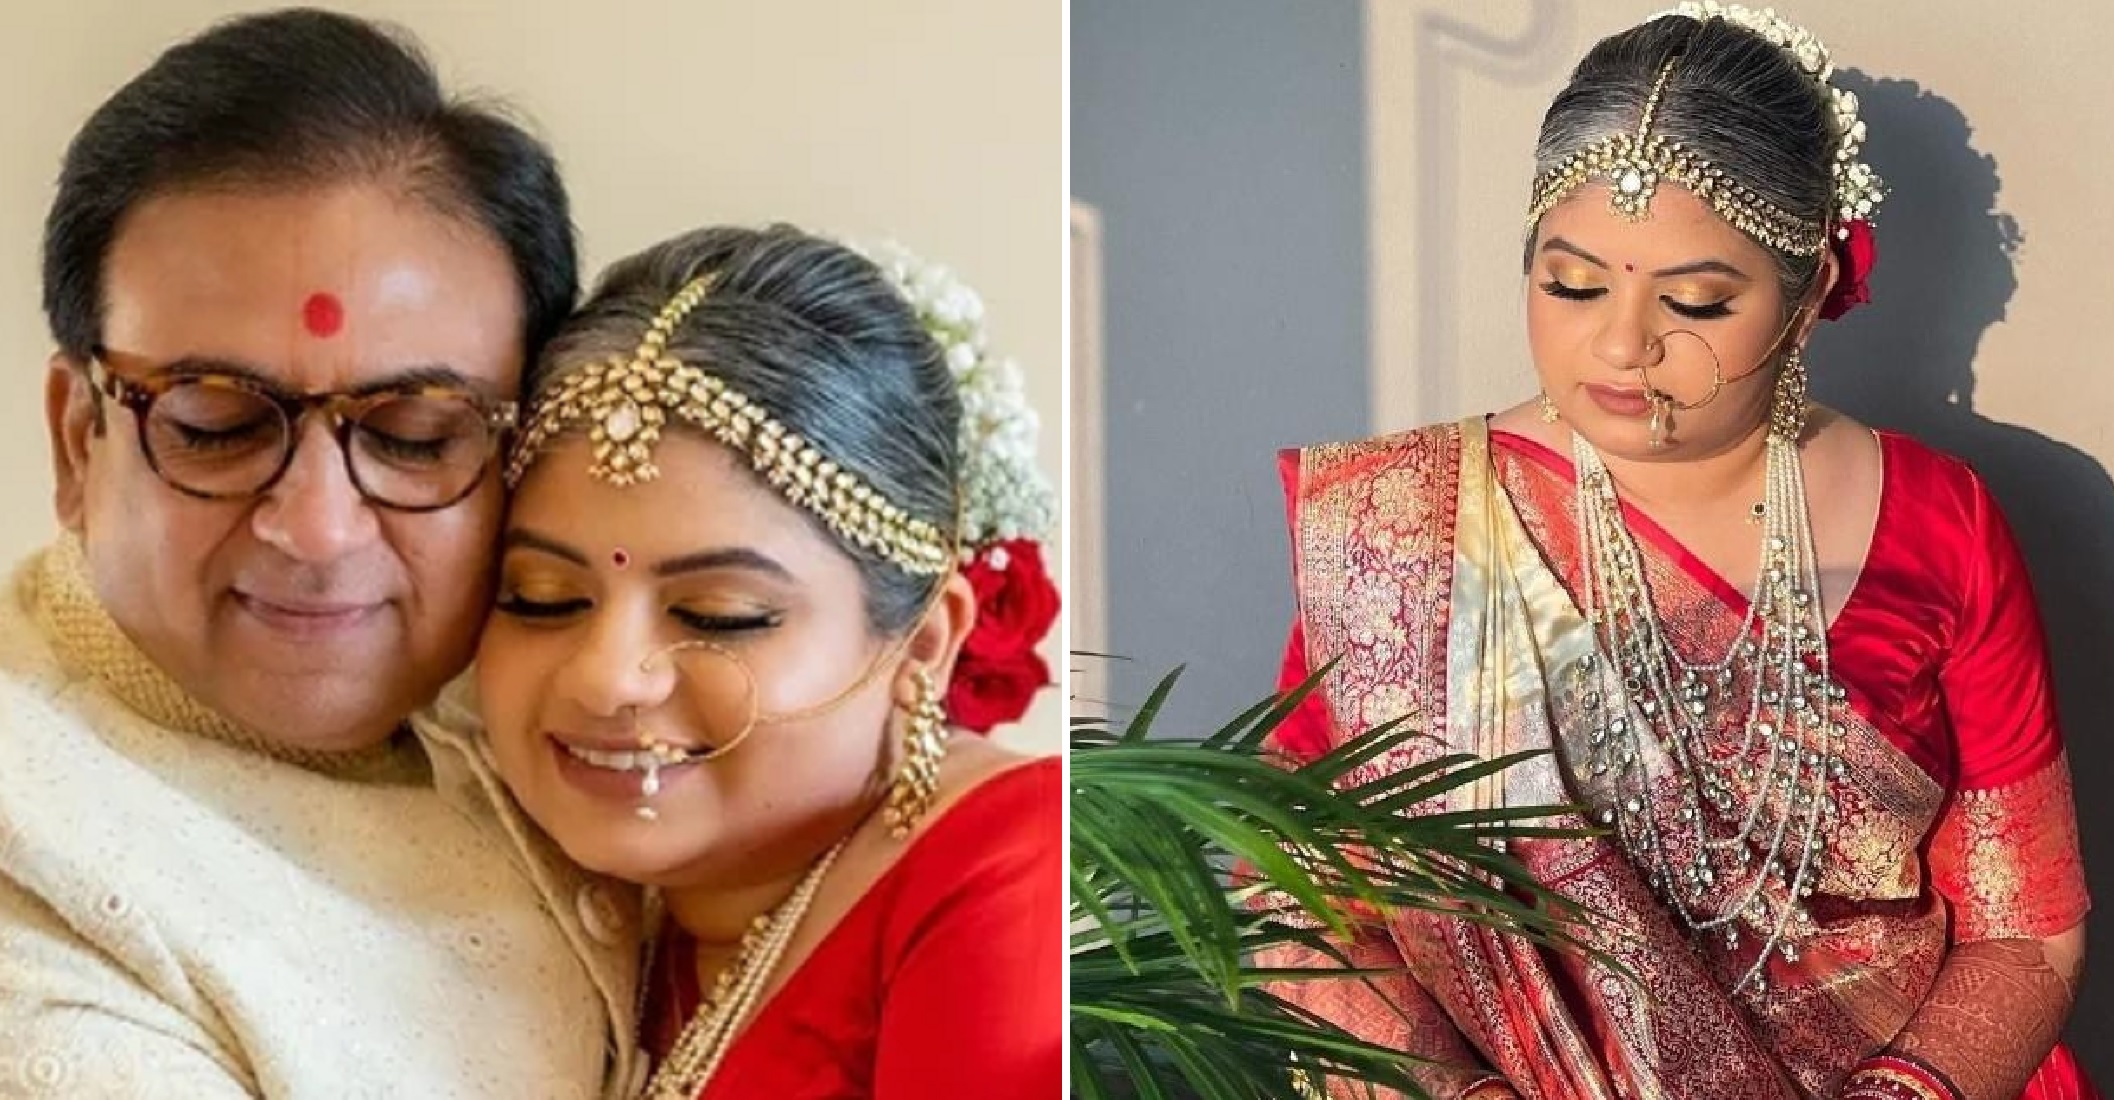 Dilip Joshi’s Daughter Sets An Example By Not Covering Her Grey Hair For Marriage, Earns Applause From Netizens